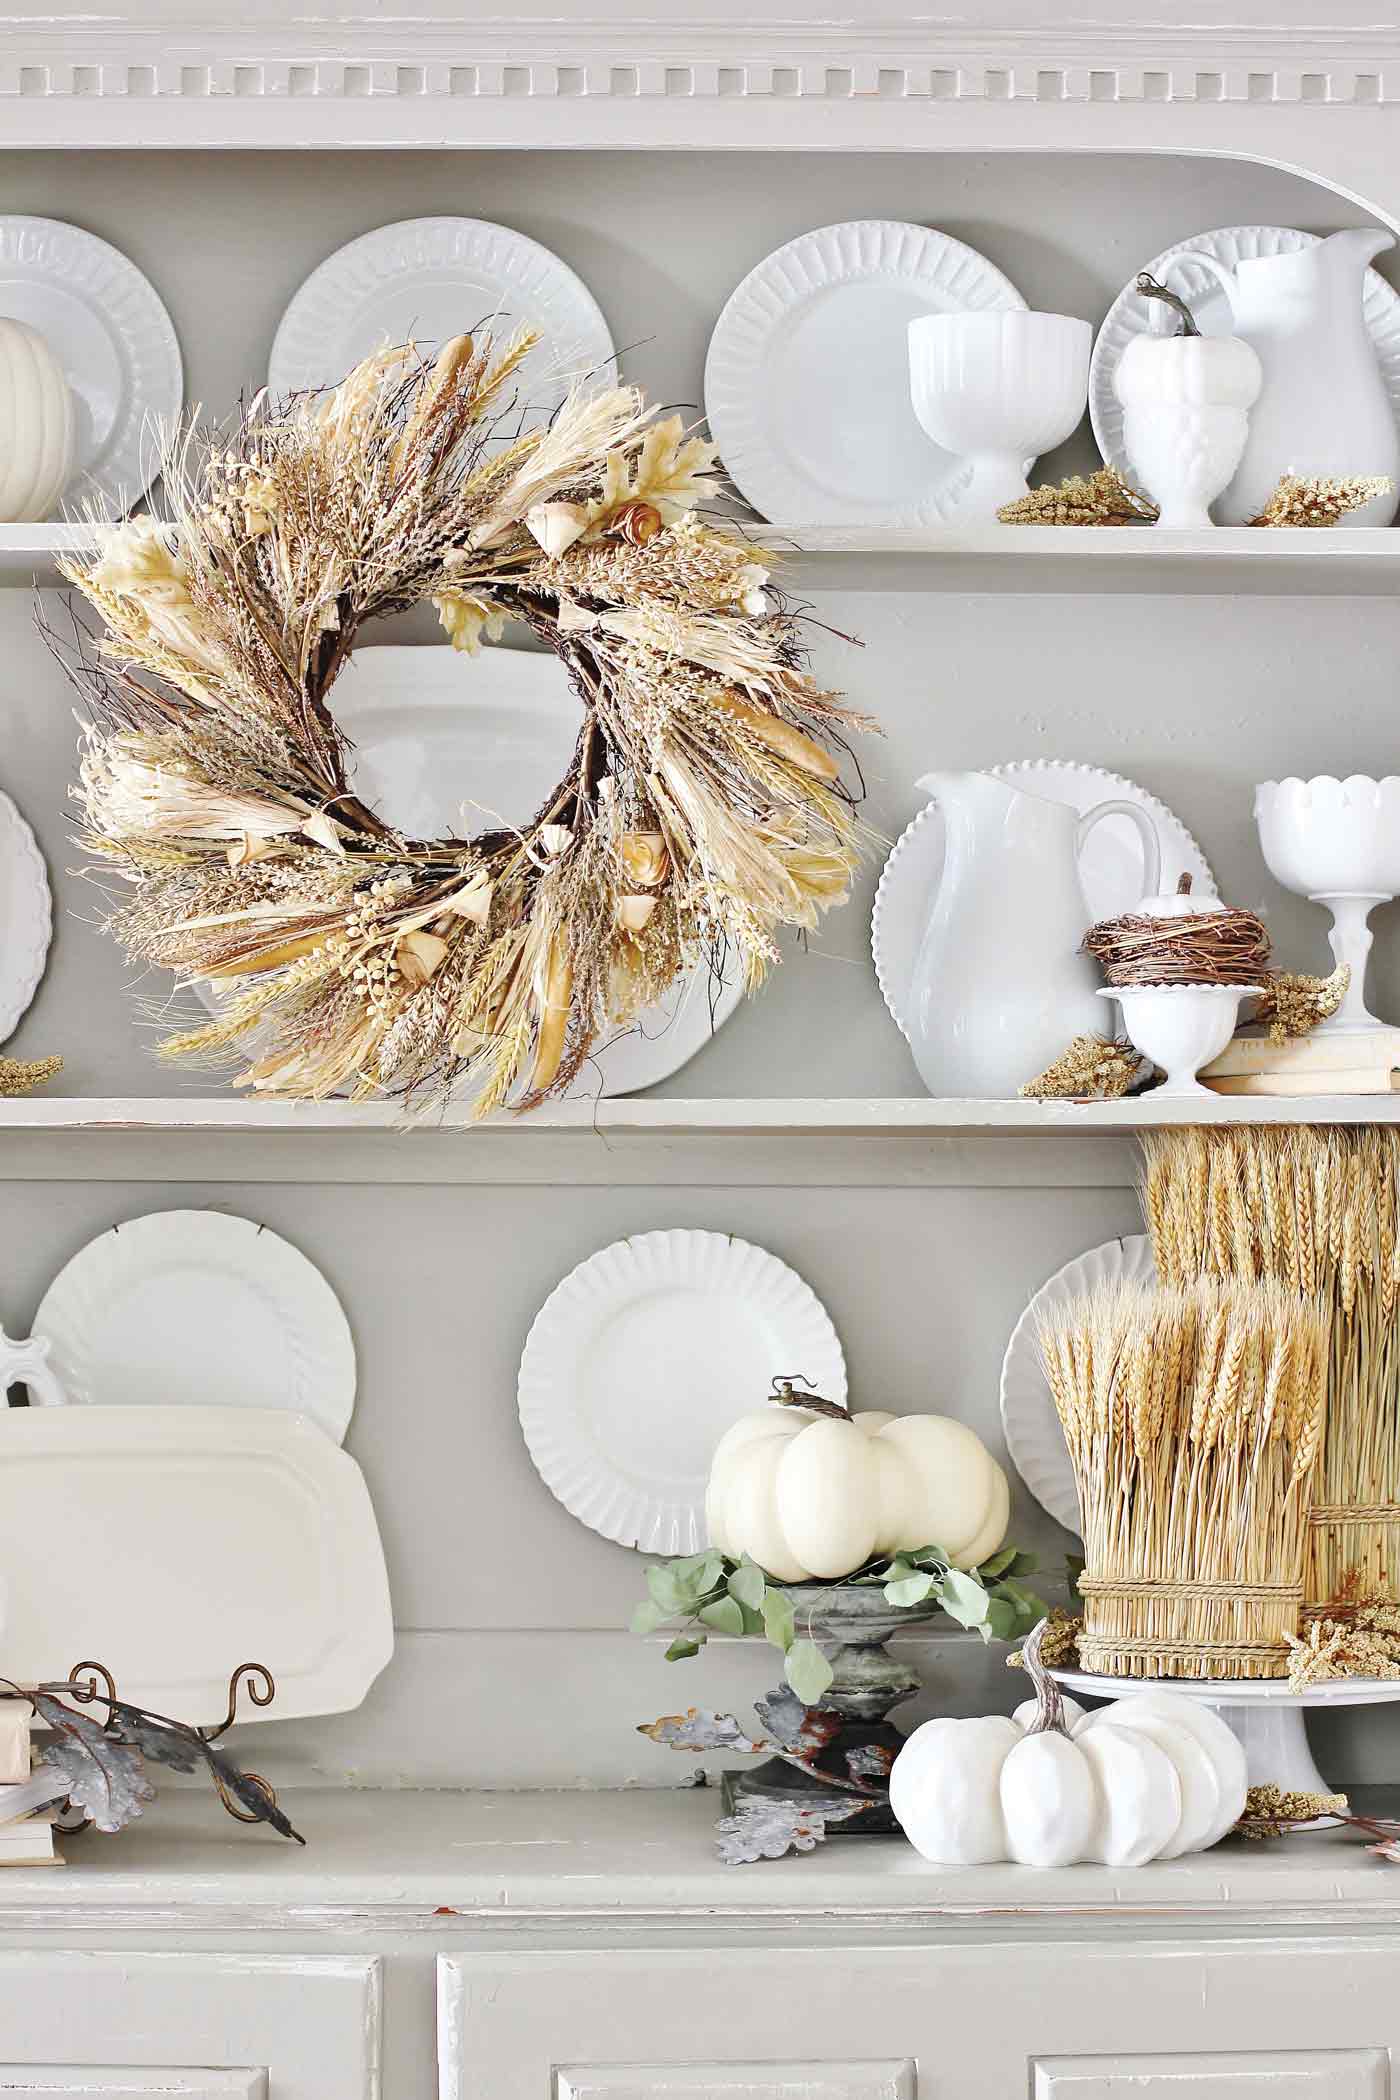 Bookshelf with pumpkins and wreath for easy fall decorating ideas